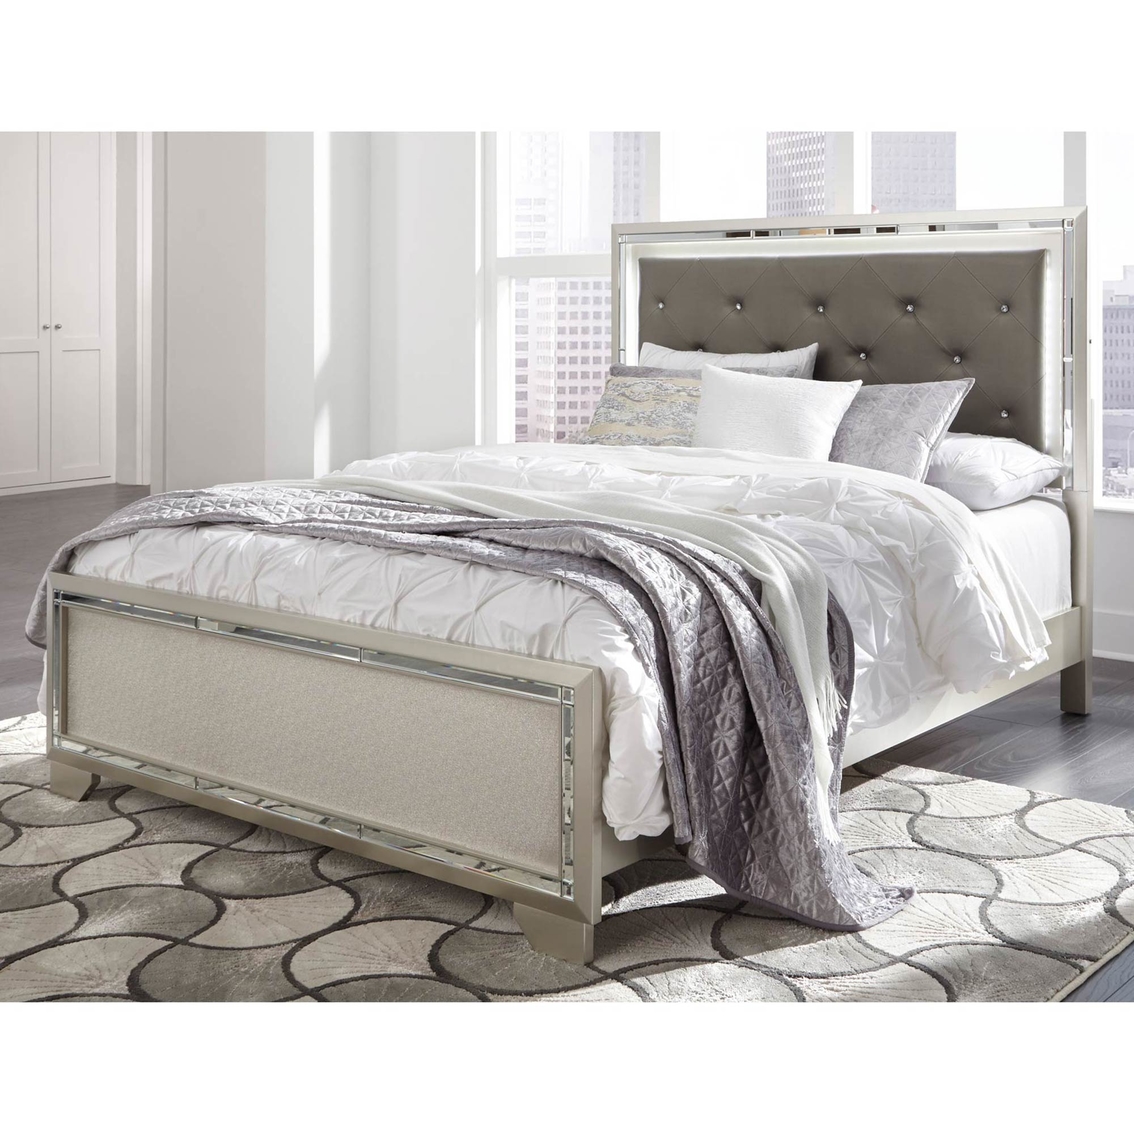 Signature Design by Ashley Lonnix Panel Bed - Image 2 of 4